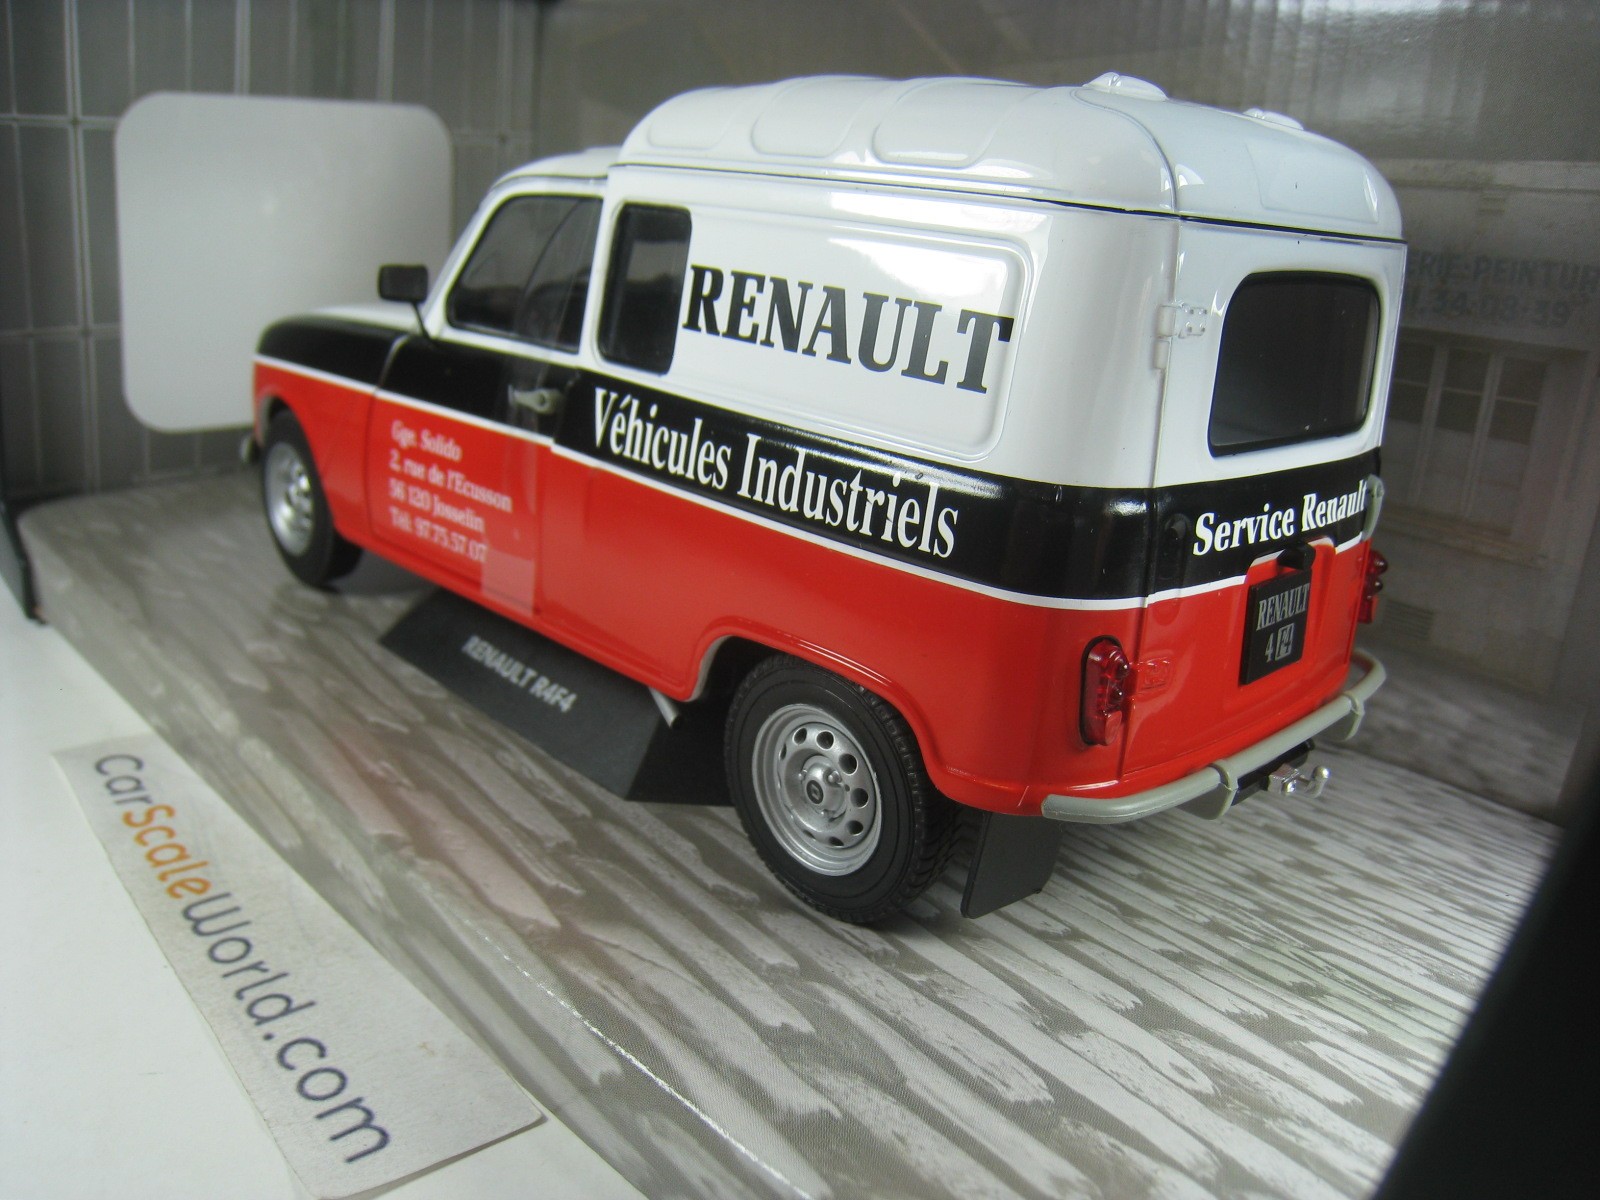 Renault 4L F4 Véhicules industriels 1988 Solido 1/18°